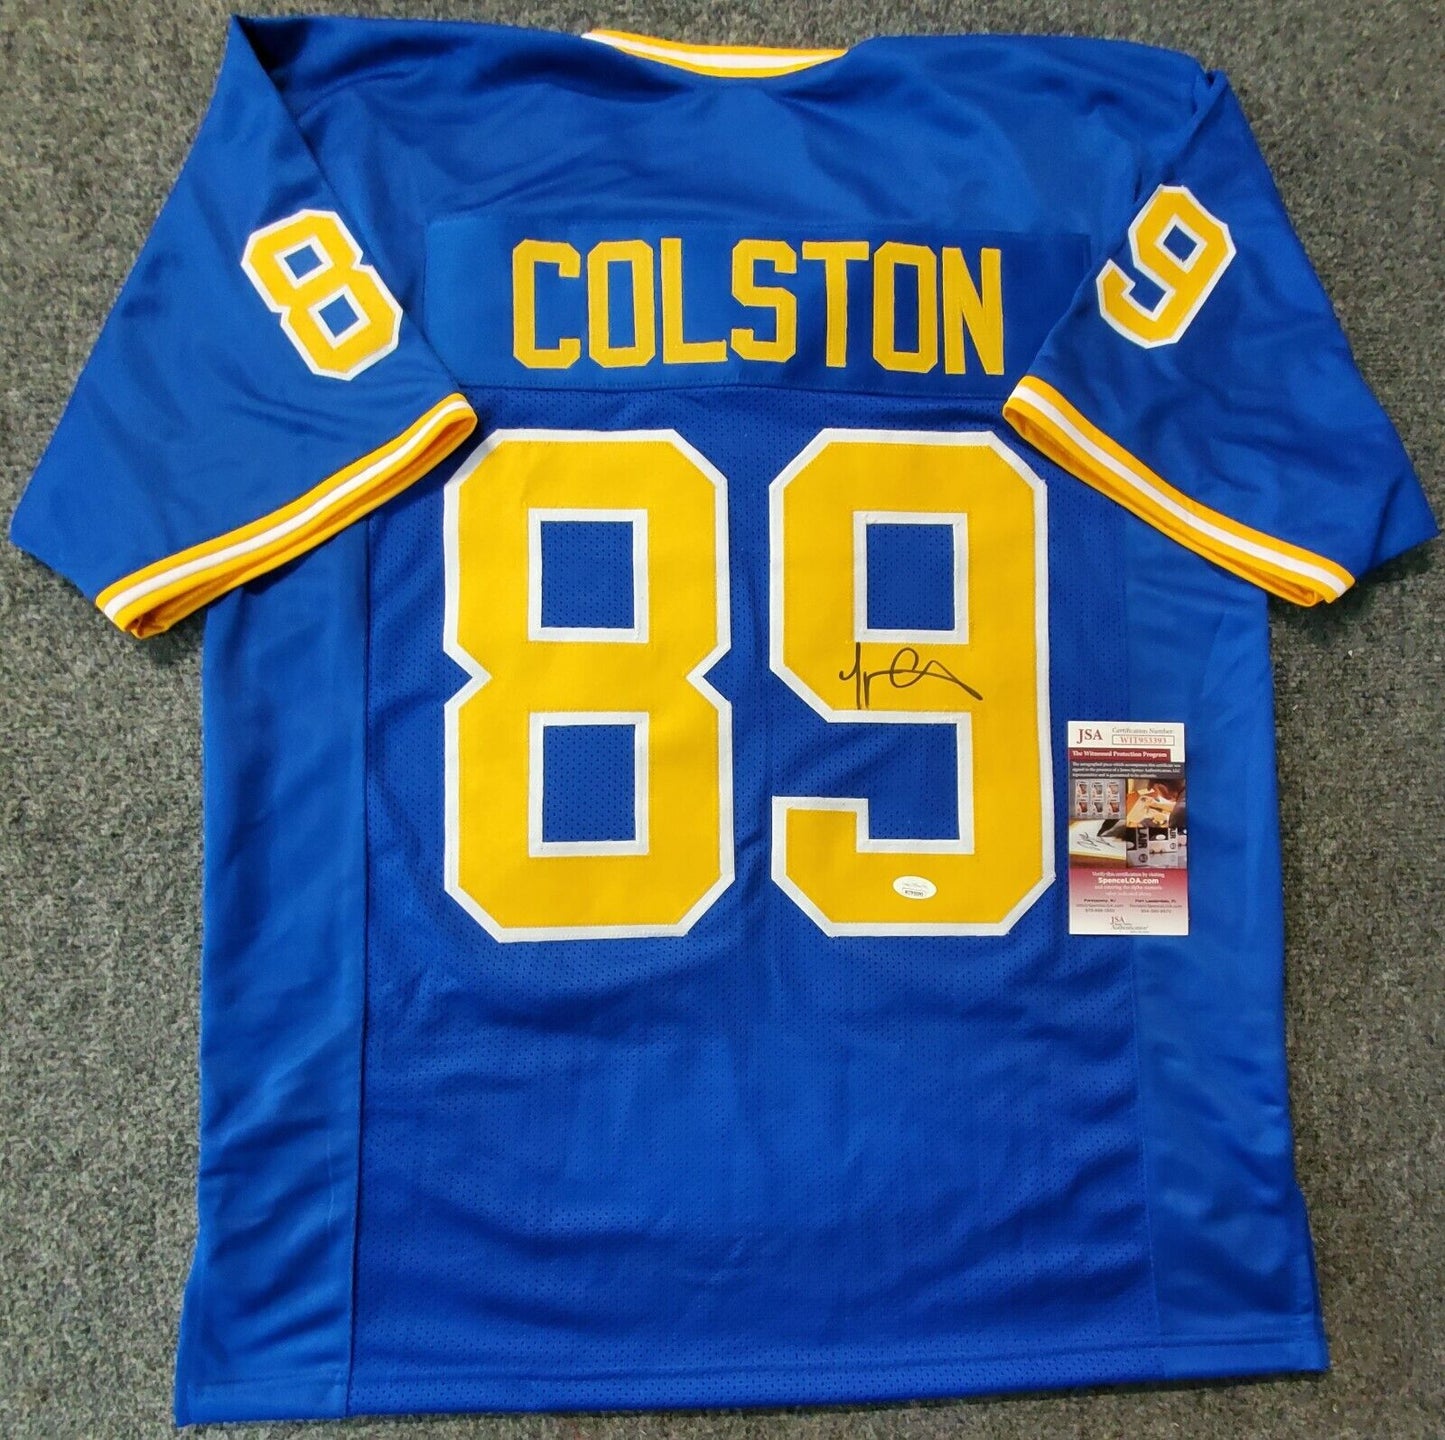 MVP Authentics Hofstra Pride Marques Colston Autographed Signed Jersey Jsa Coa 117 sports jersey framing , jersey framing